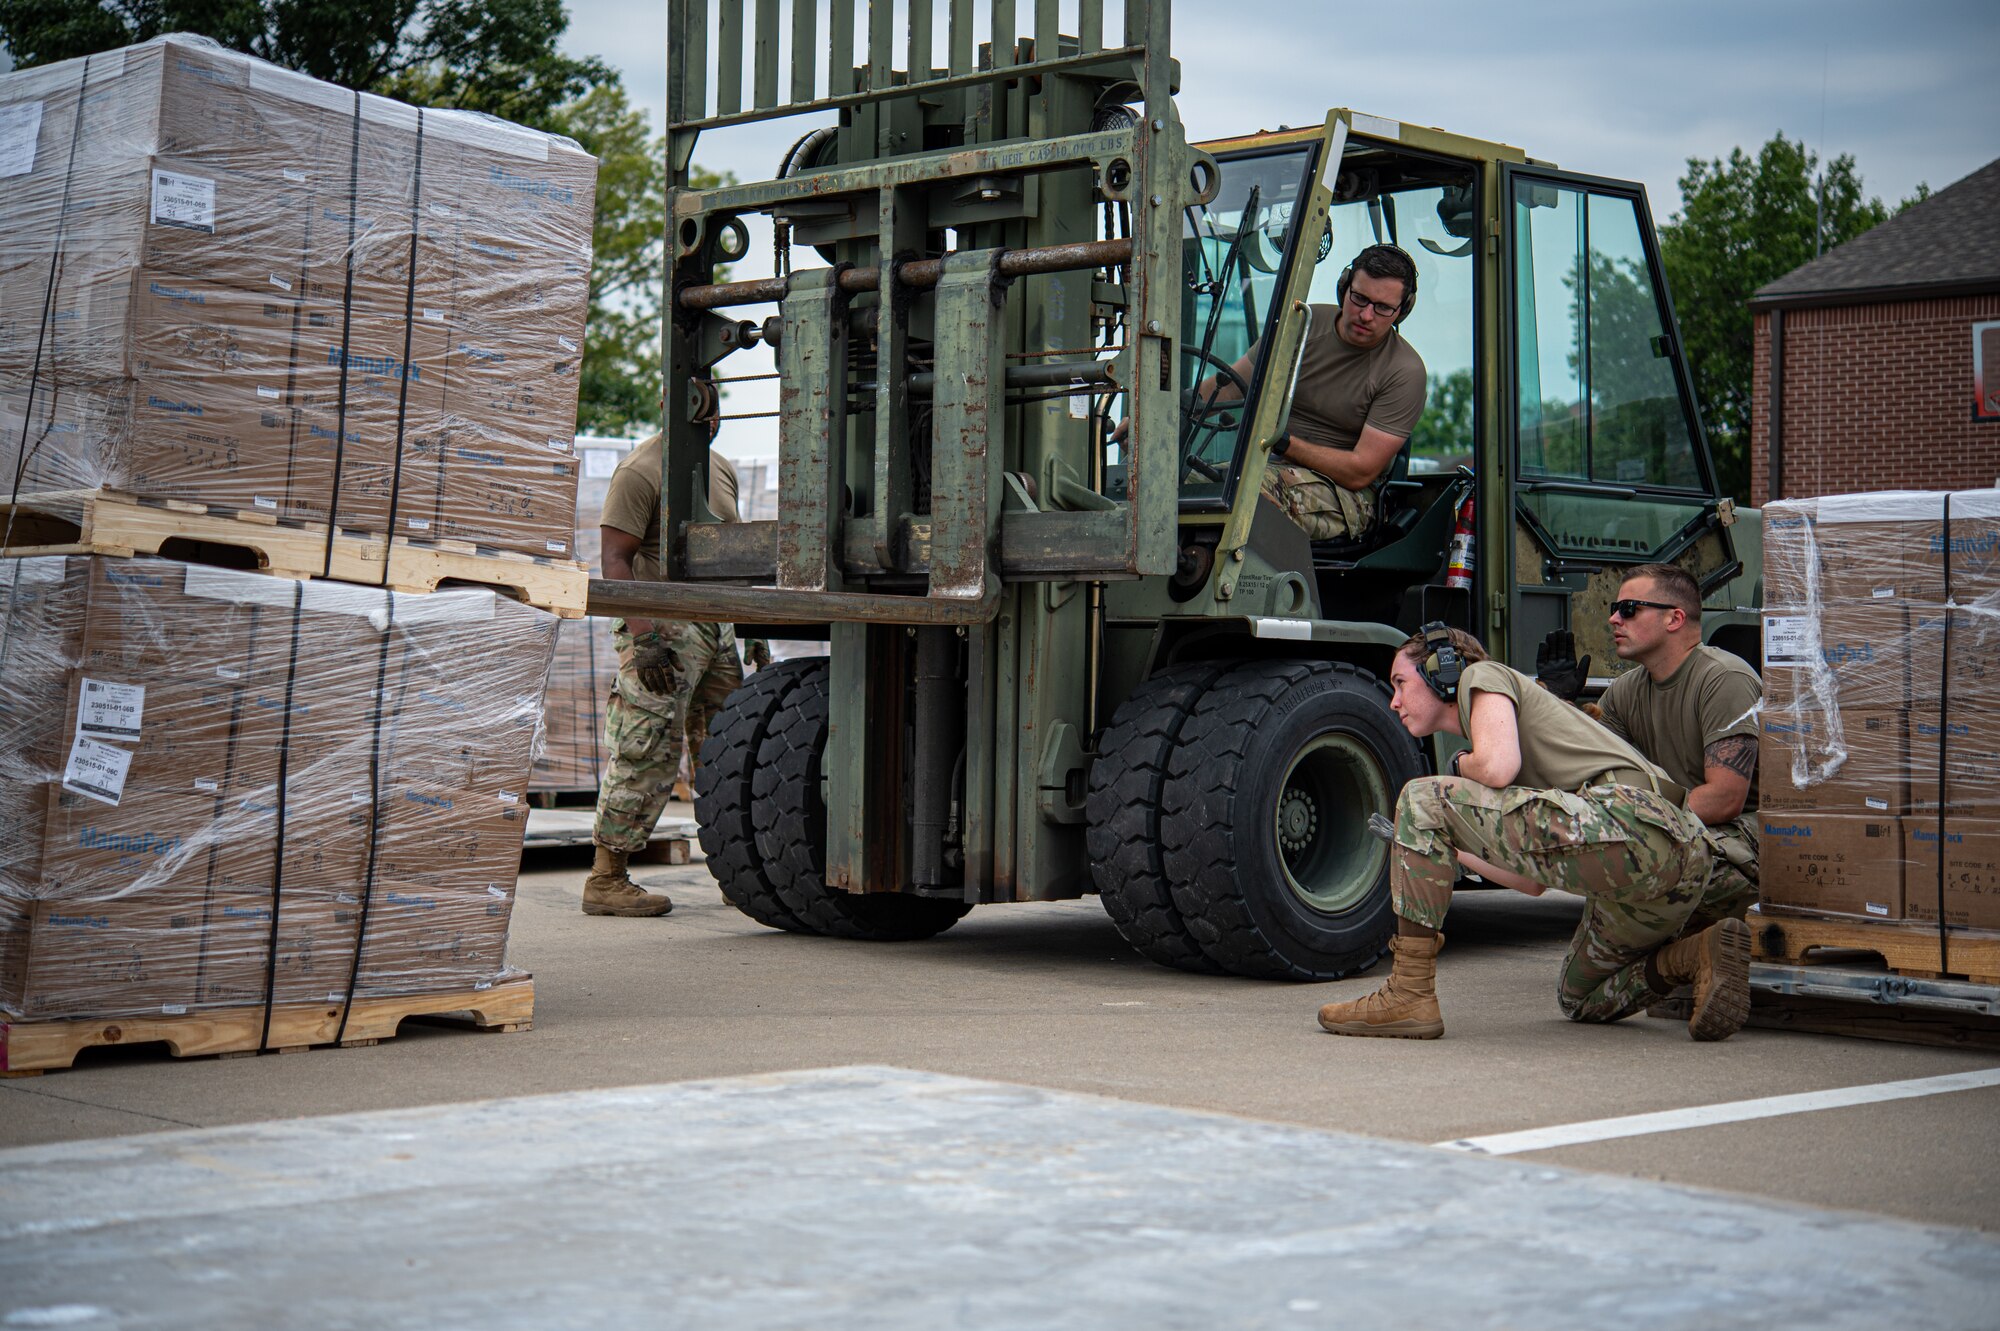 Airman uses forklift to carry pallet.